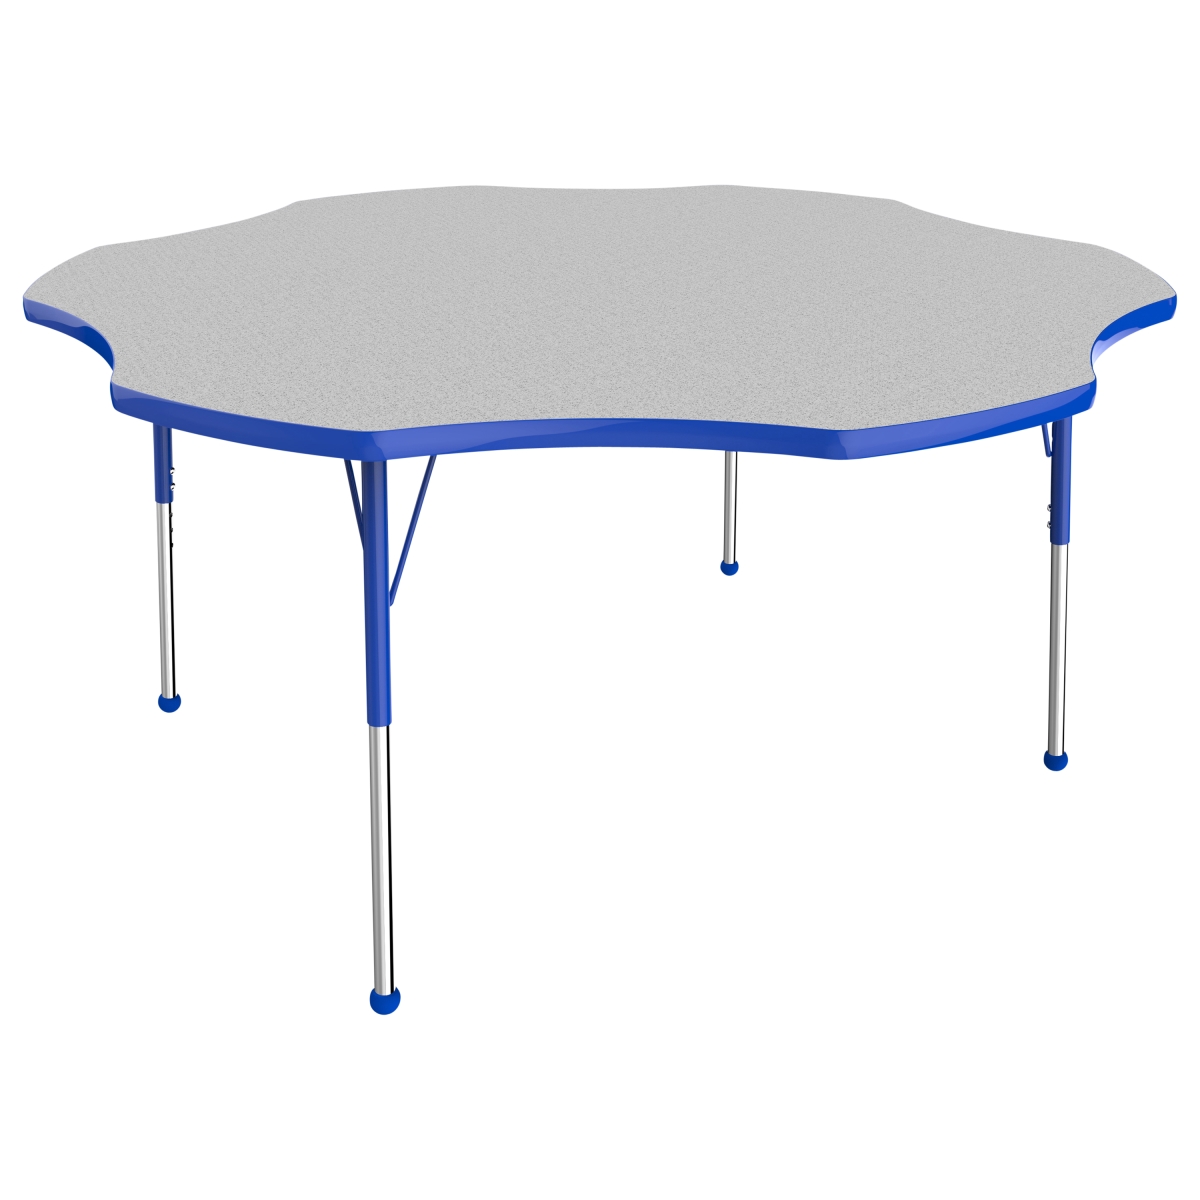 10090-gybl 60 In. Flower T-mold Adjustable Activity Table With Standard Ball - Grey & Blue